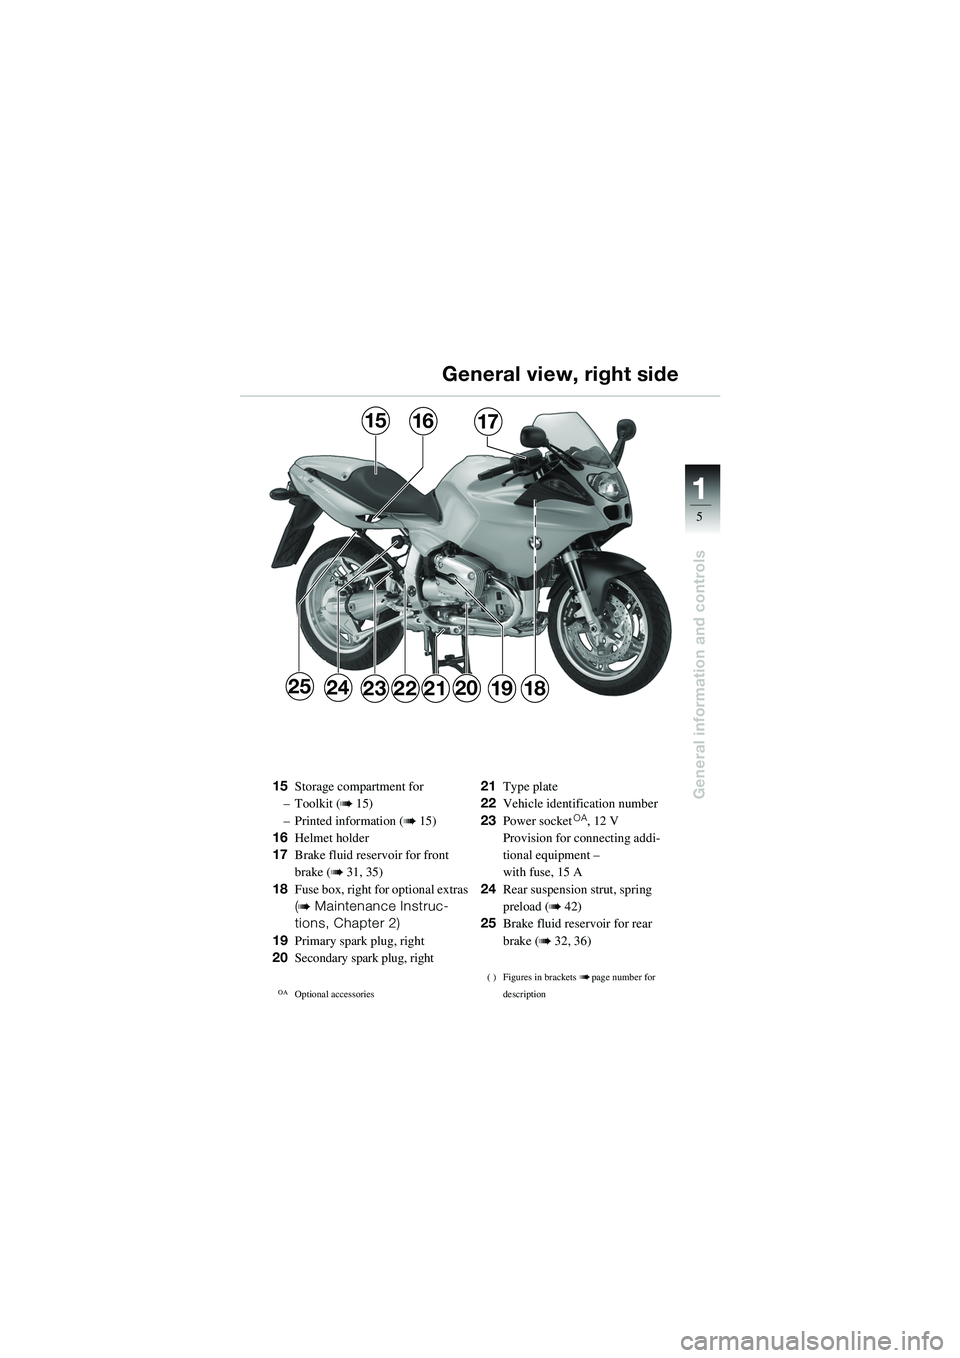 BMW MOTORRAD R 1100 S 2002  Riders Manual (in English) 11
5
General information and controls
25
171615
23181920212224
15Storage compartment for
– Toolkit (
b 15)
– Printed information (
b 15)
16 Helmet holder
17 Brake fluid reservoir for front 
brake 